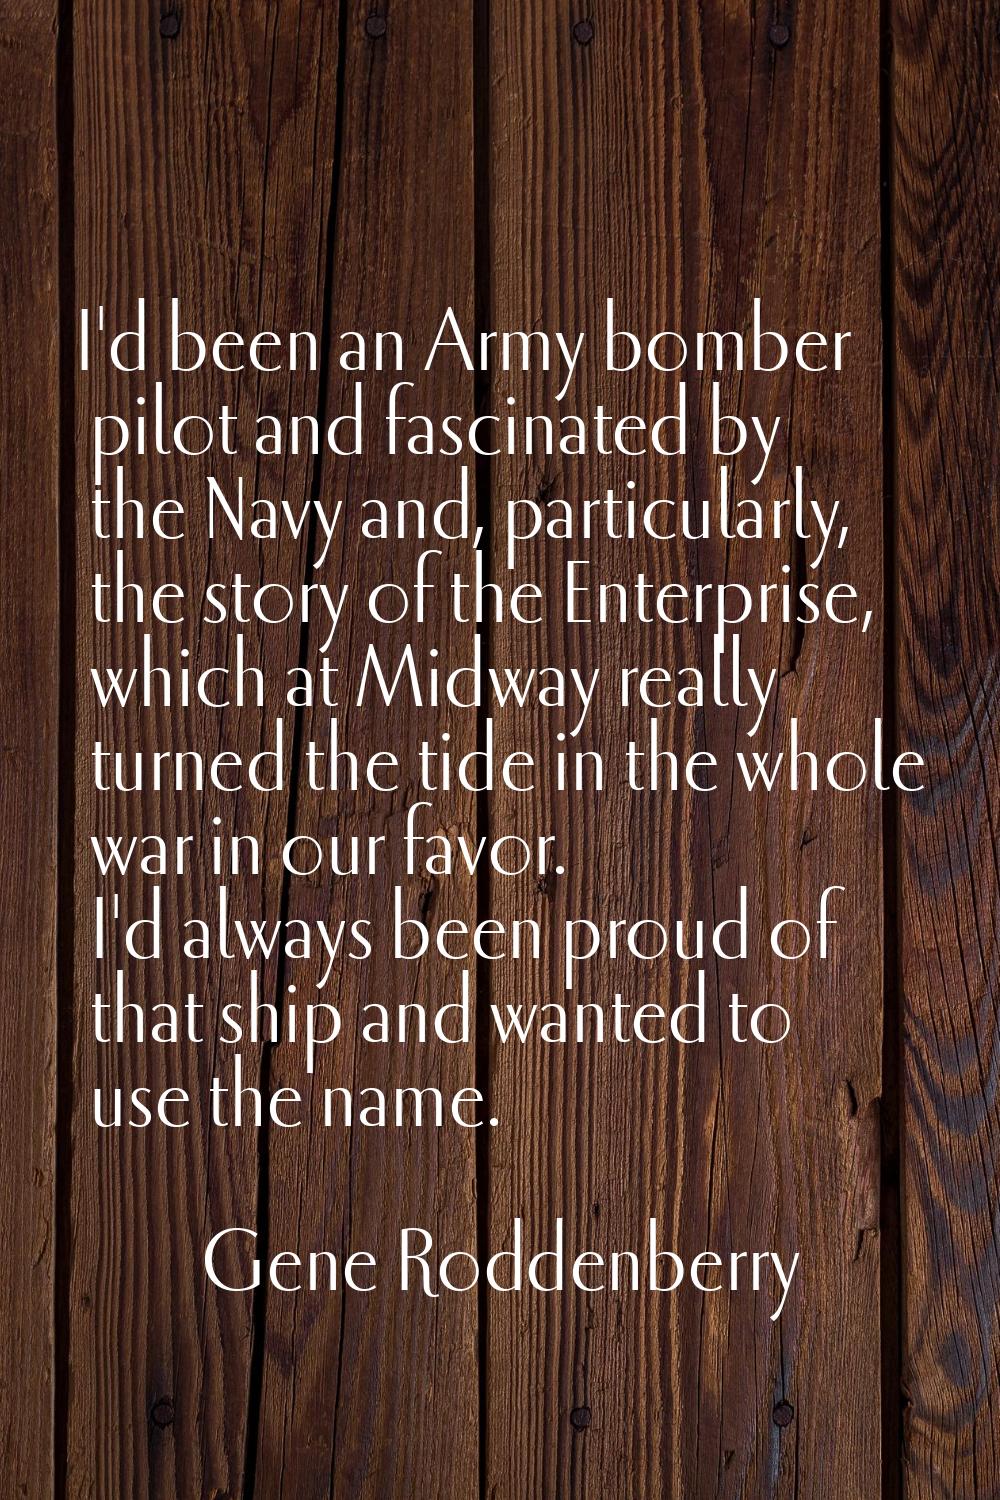 I'd been an Army bomber pilot and fascinated by the Navy and, particularly, the story of the Enterp